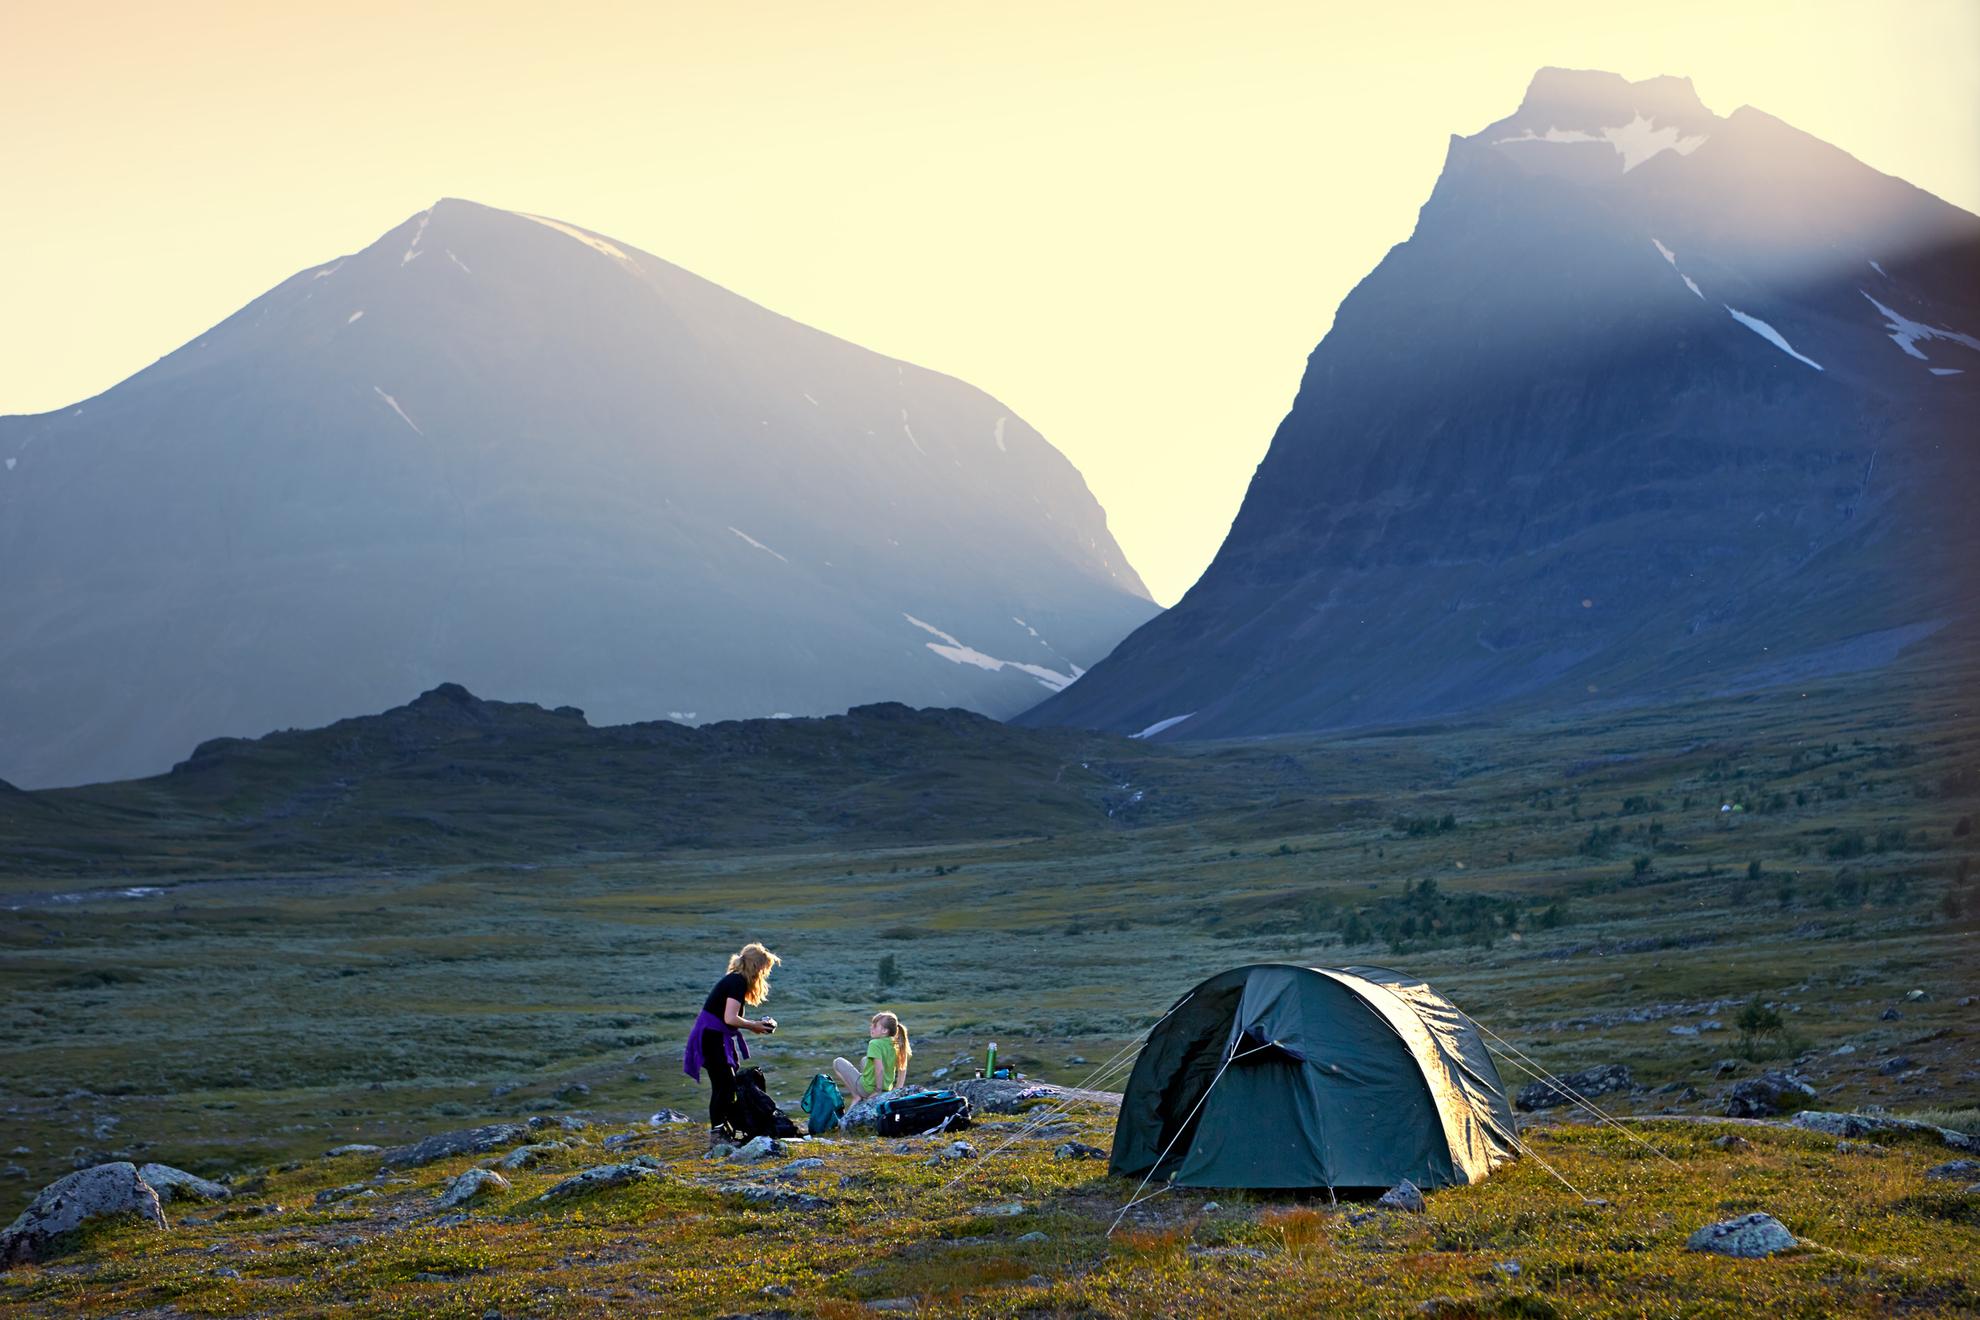 Two girls camping in the wild with mountains in the background.